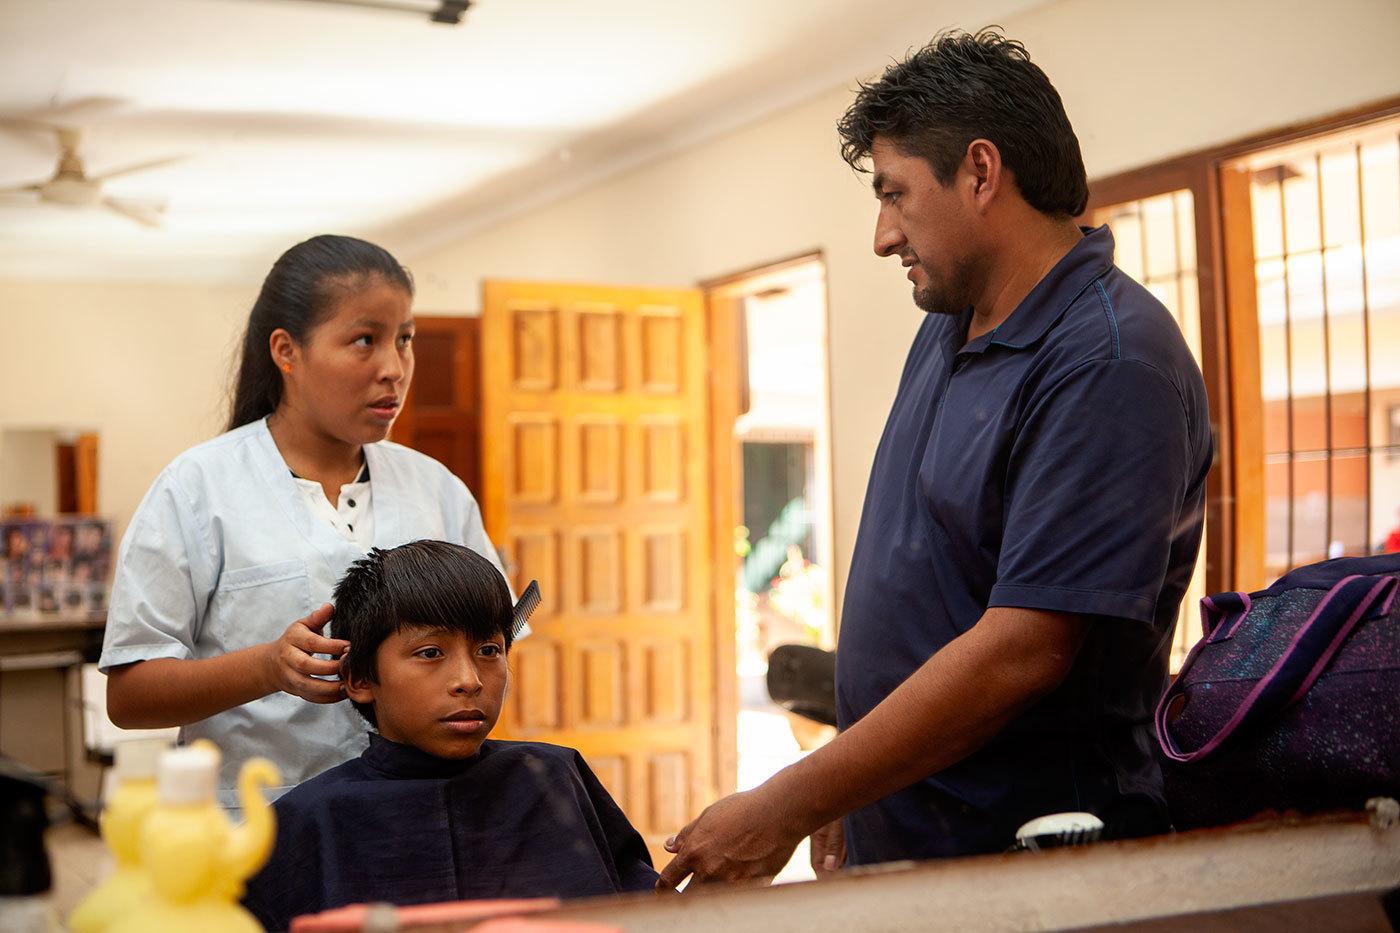 A woman cuts a young boy's hair while an instructor stands by